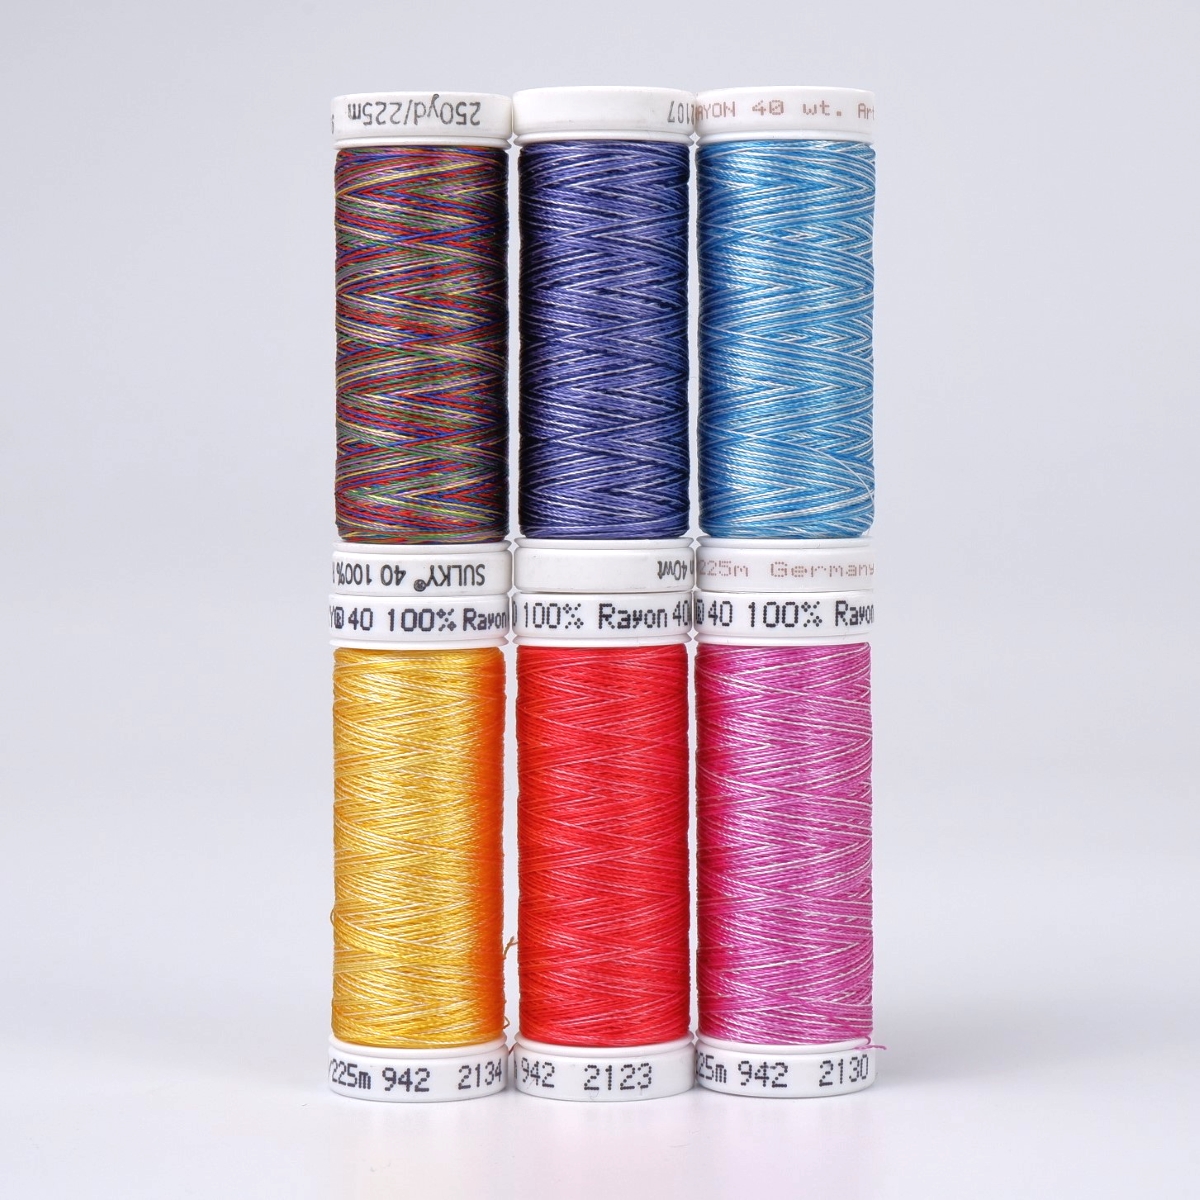 SULKY RAYON 40 - BESTSELLER MULTICOLOR
(6x 225m Snap Spools)